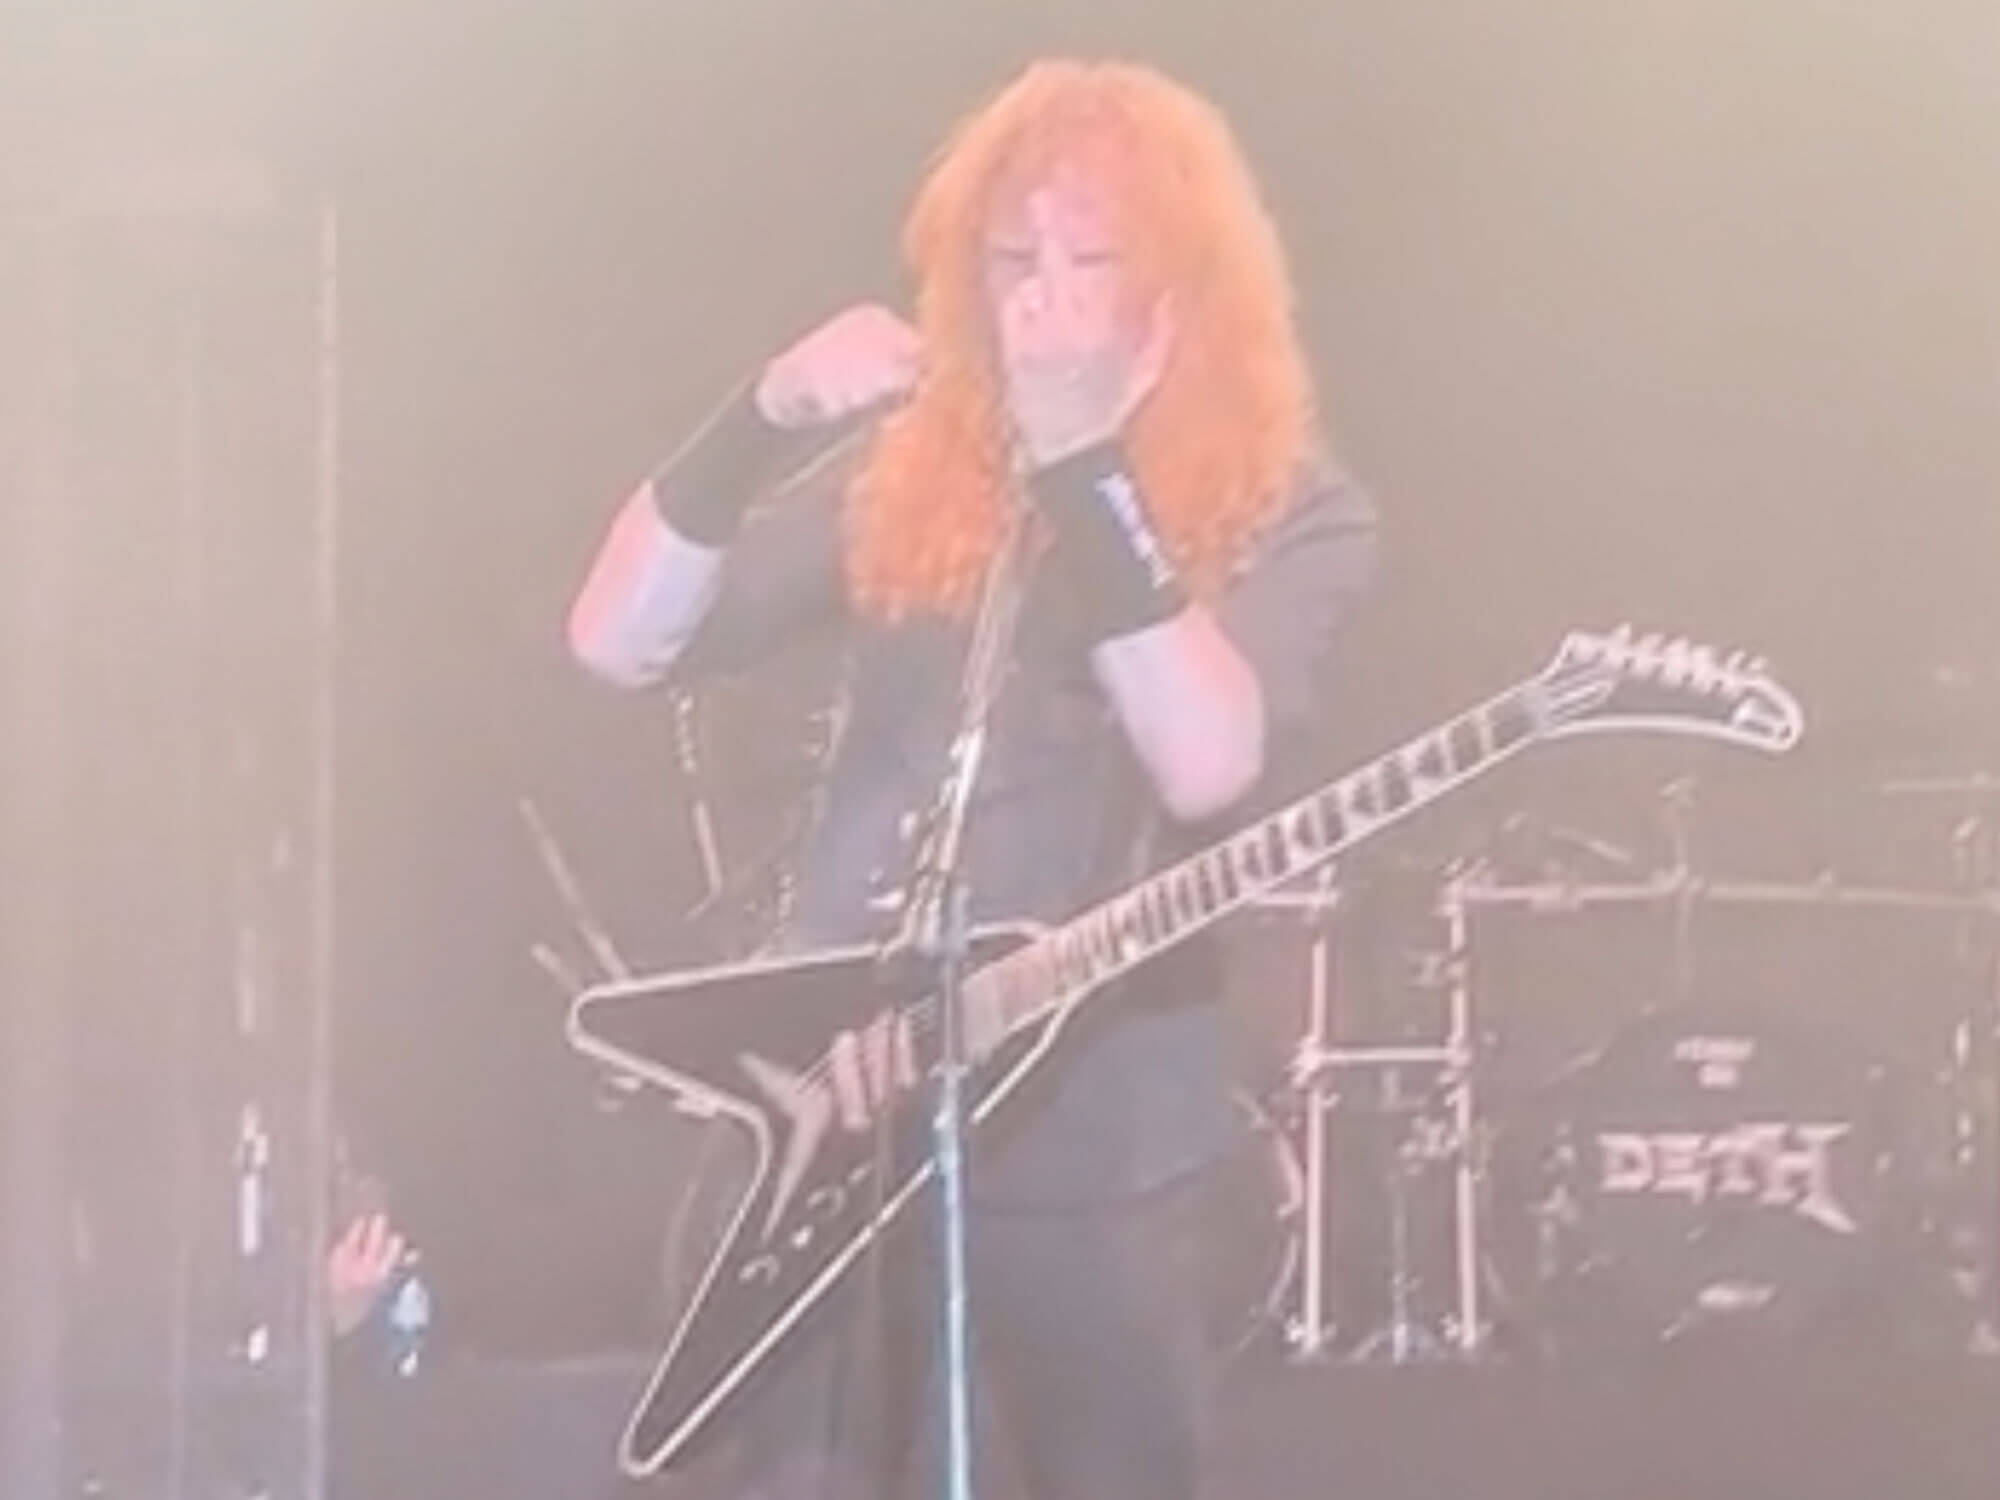 Dave Mustaine giving a middle finger while onstage